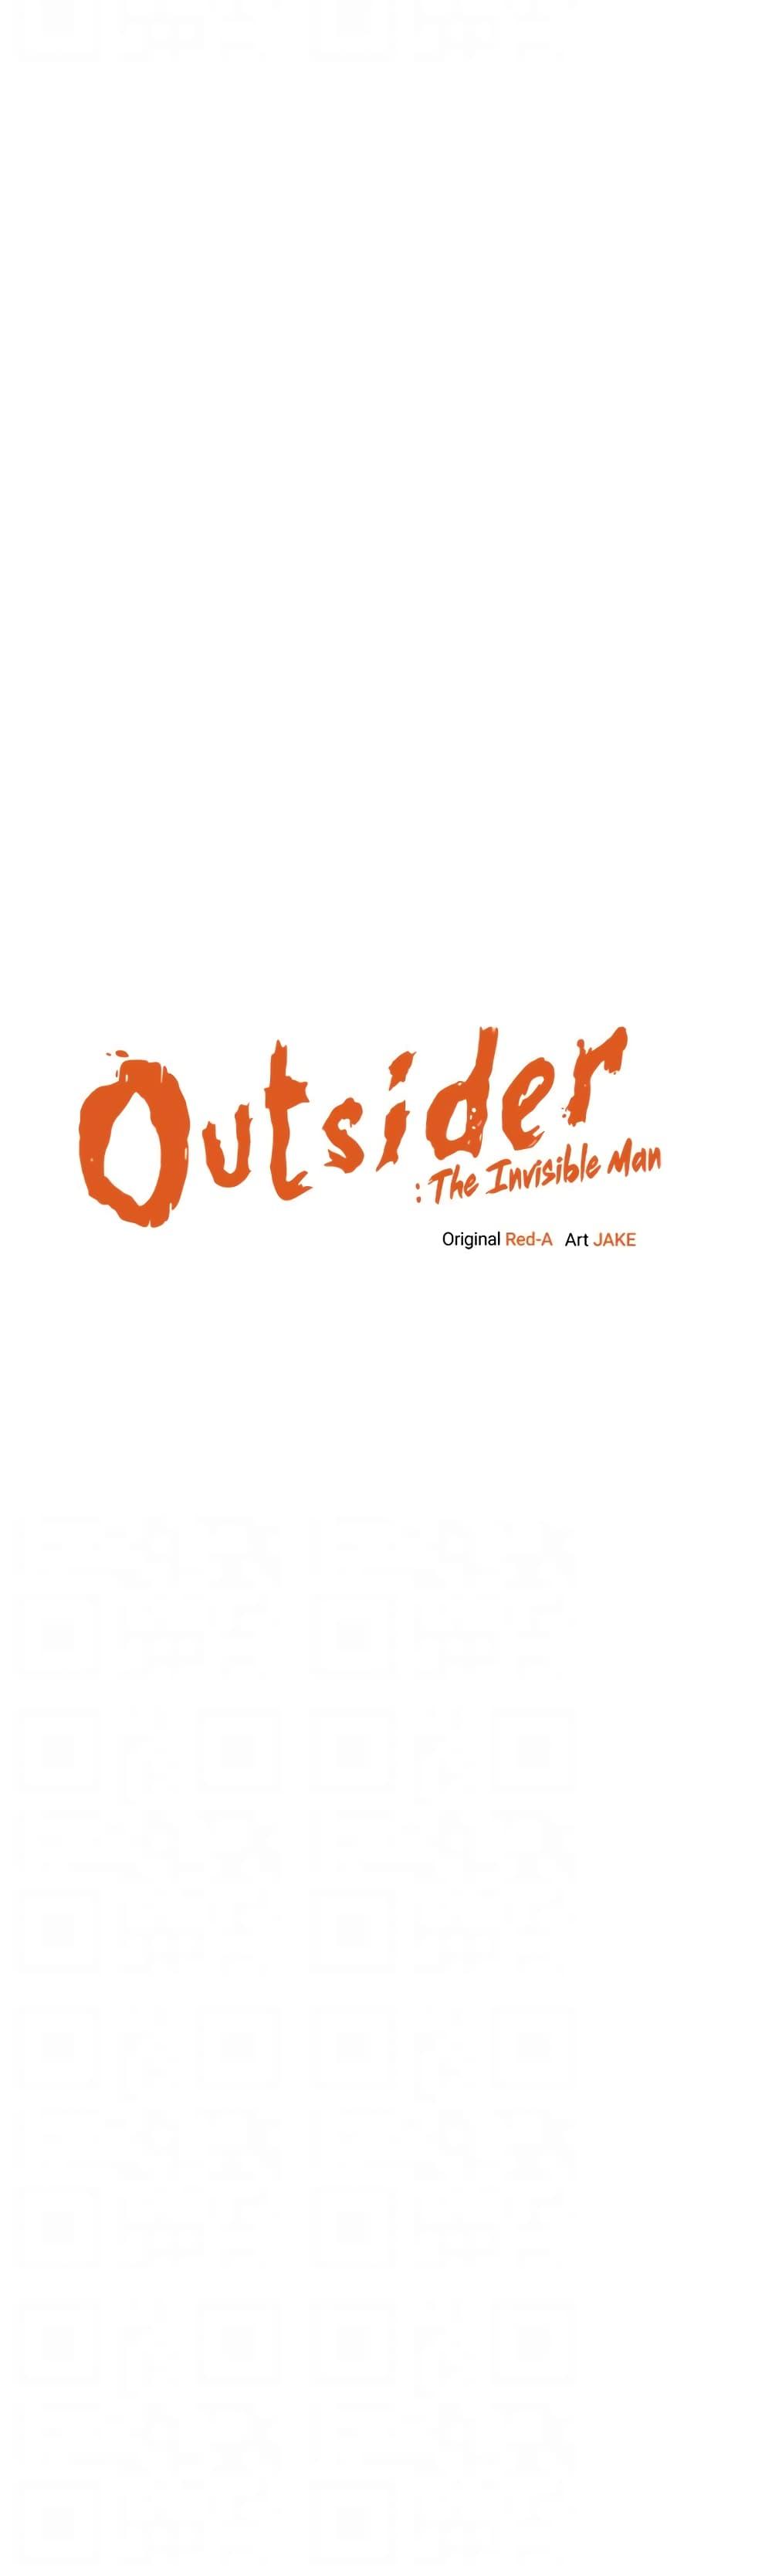 Outsider The Invisible Man 13 01